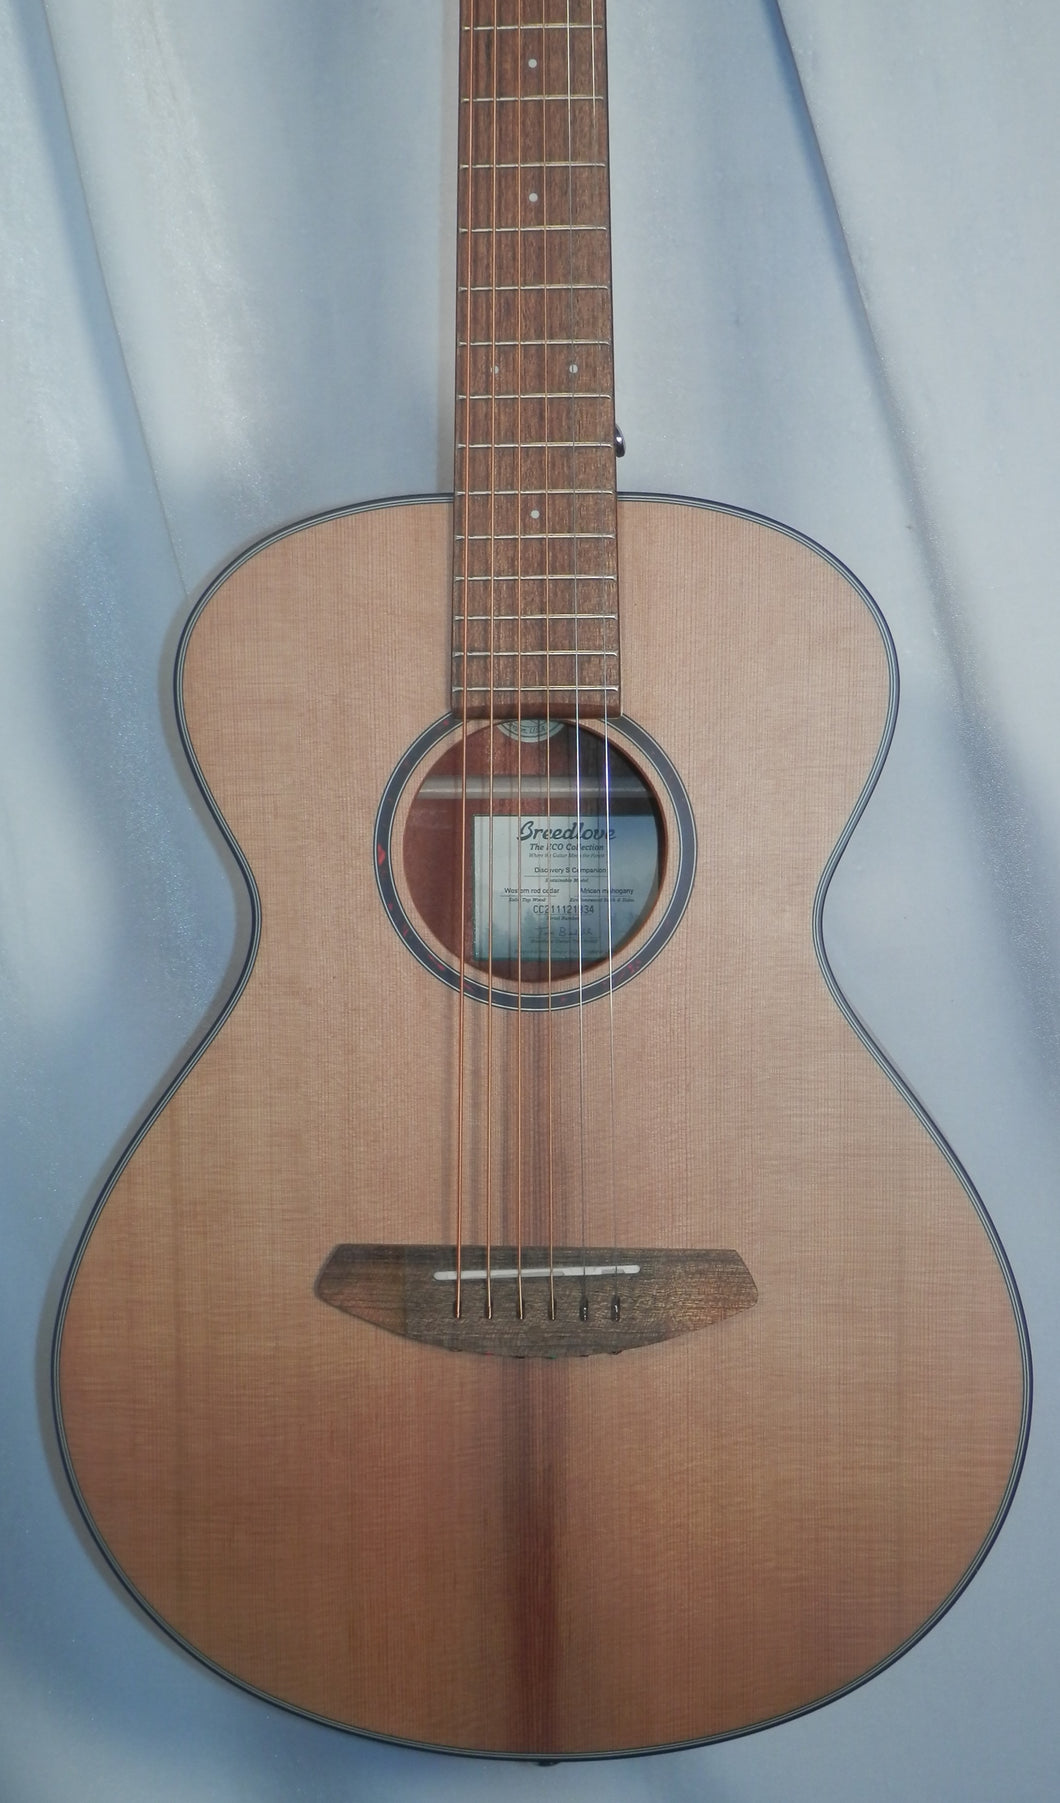 Breedlove Discovery S Companion Red cedar-African mahogany Natural Satin Acoustic